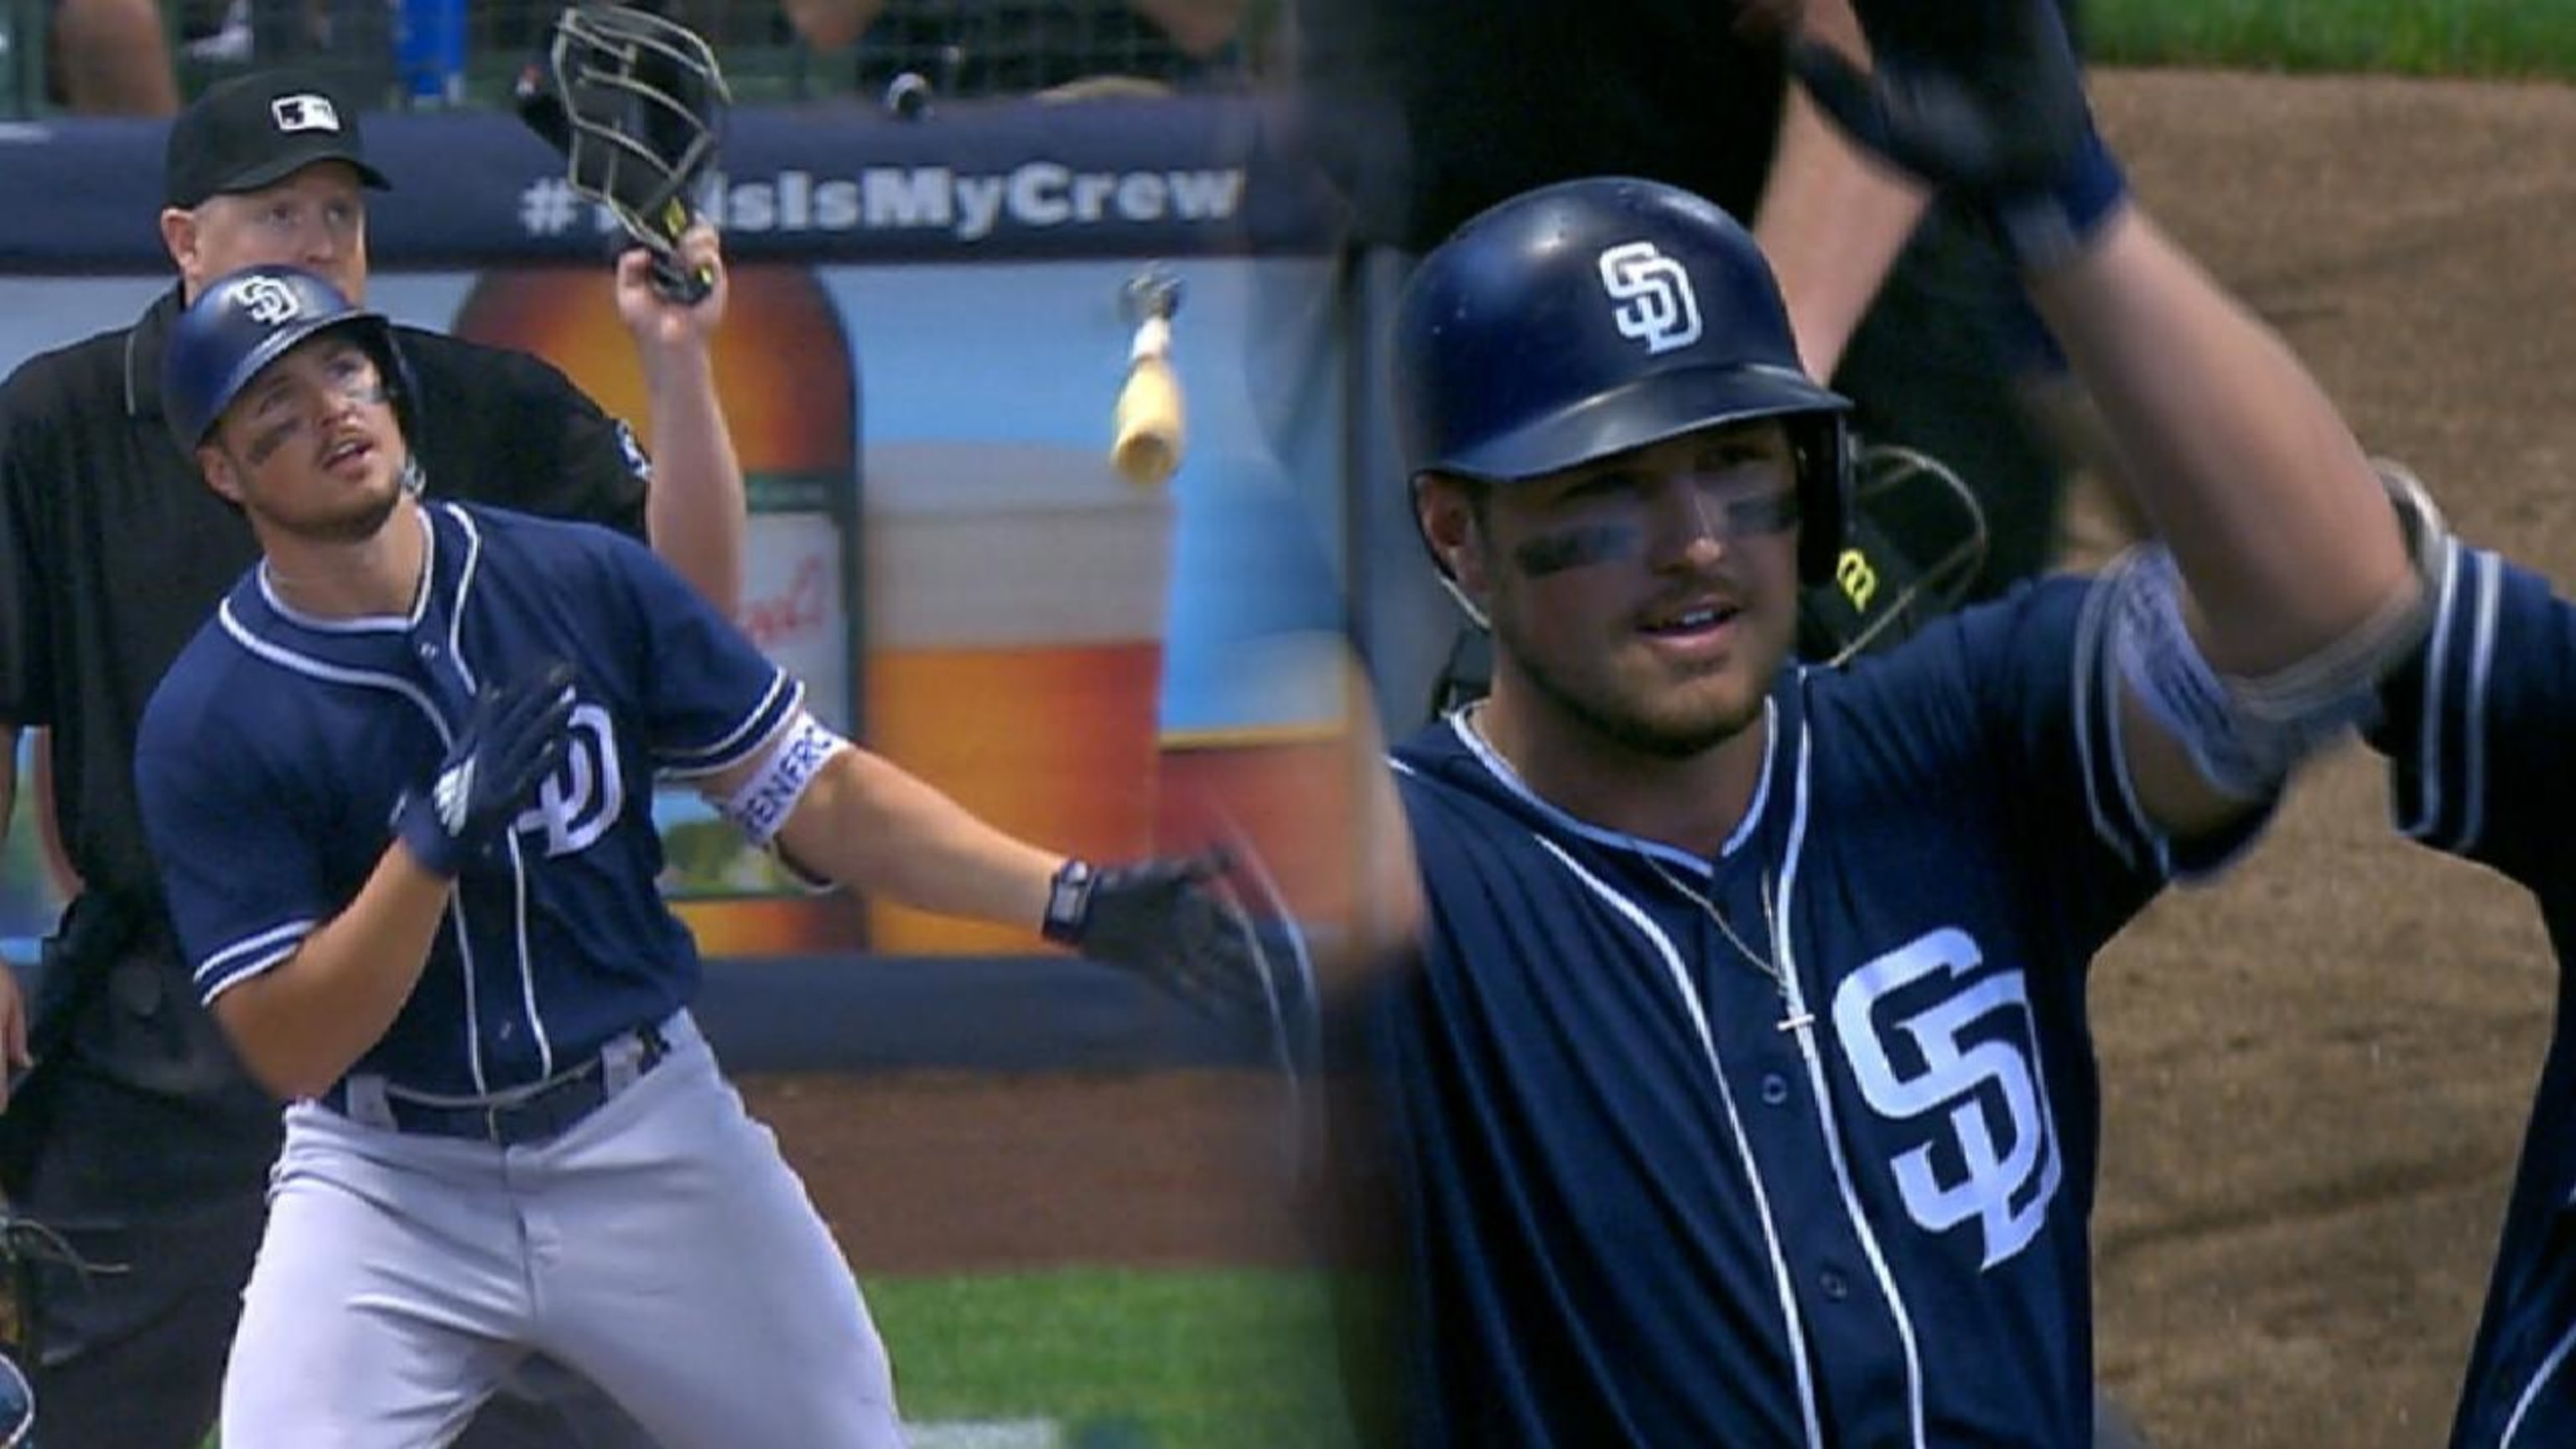 Hunter Renfroe's grand slam launches Padres past Reds